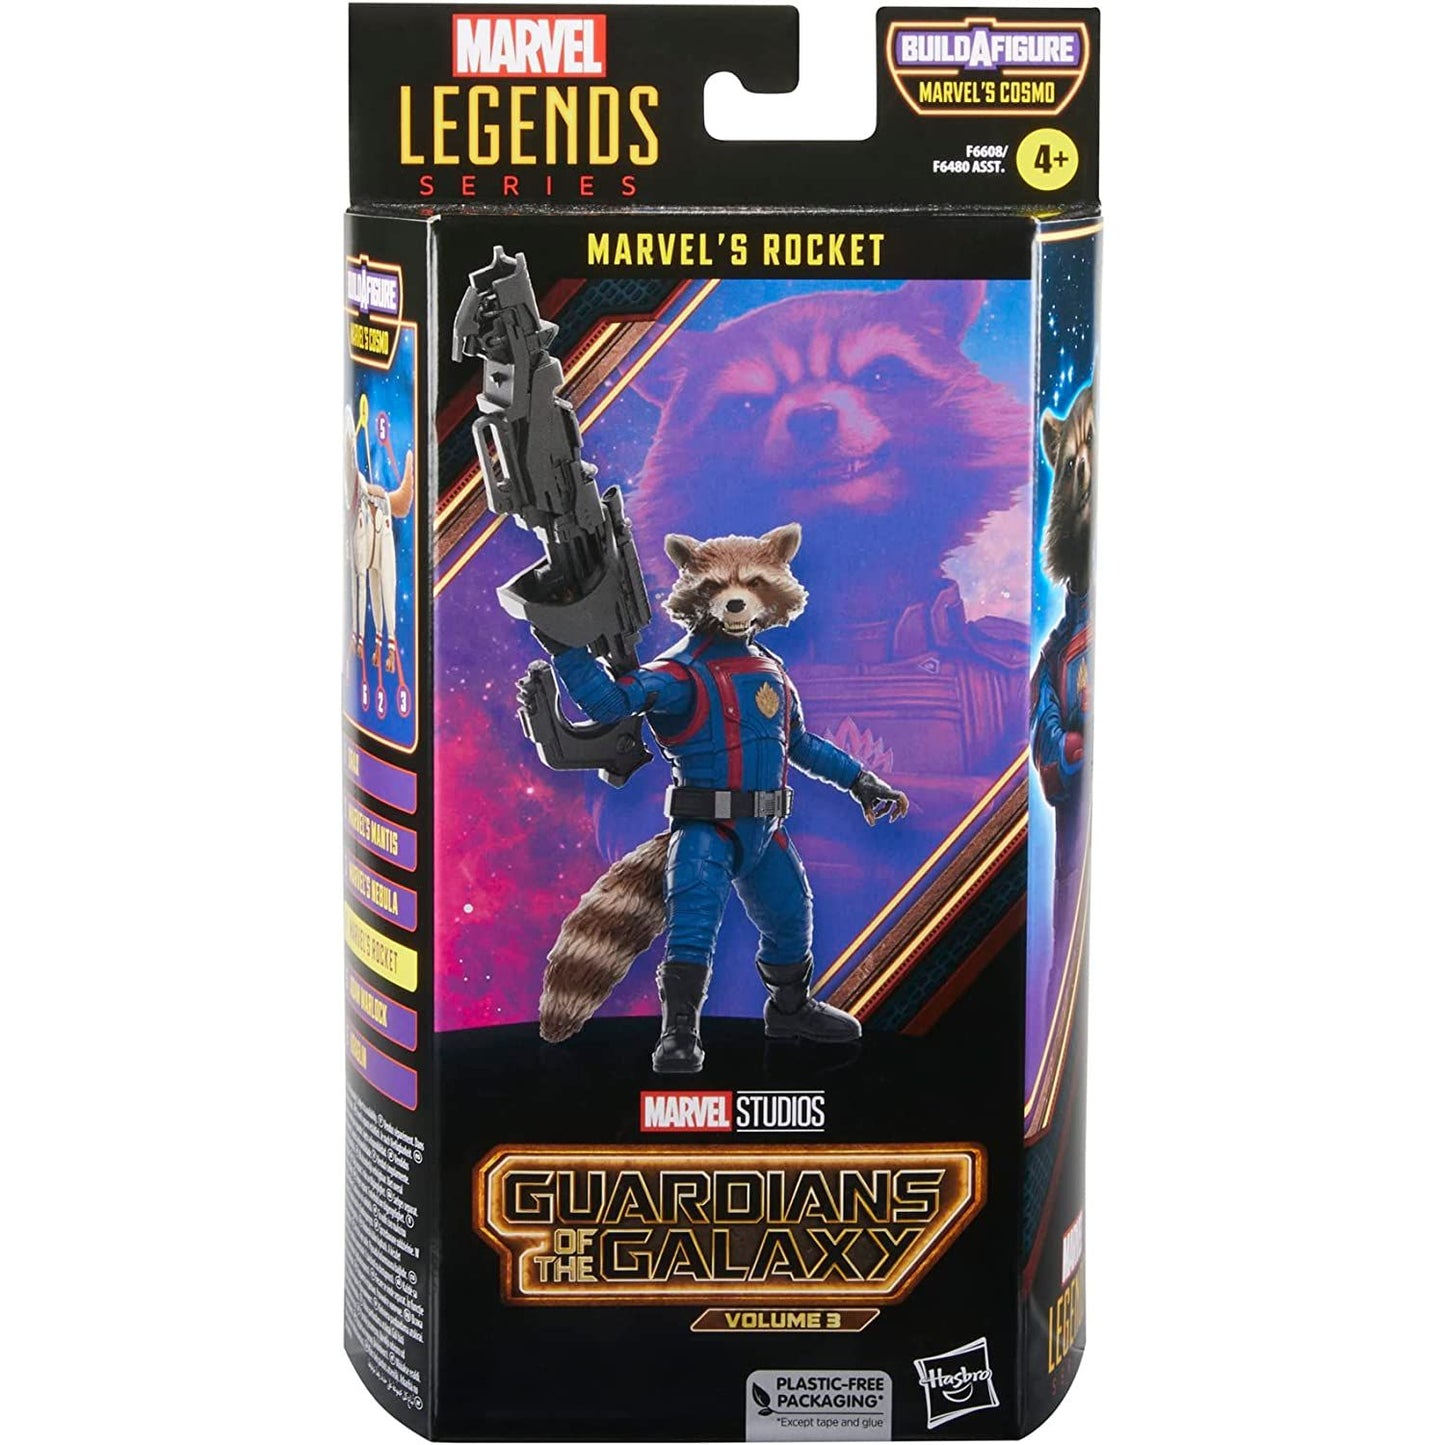 Guardians of The Galaxy Vol. 3 Marvel Legends Rocket 6-Inch Action Figure Toy in a box front view - Heretoserveyou